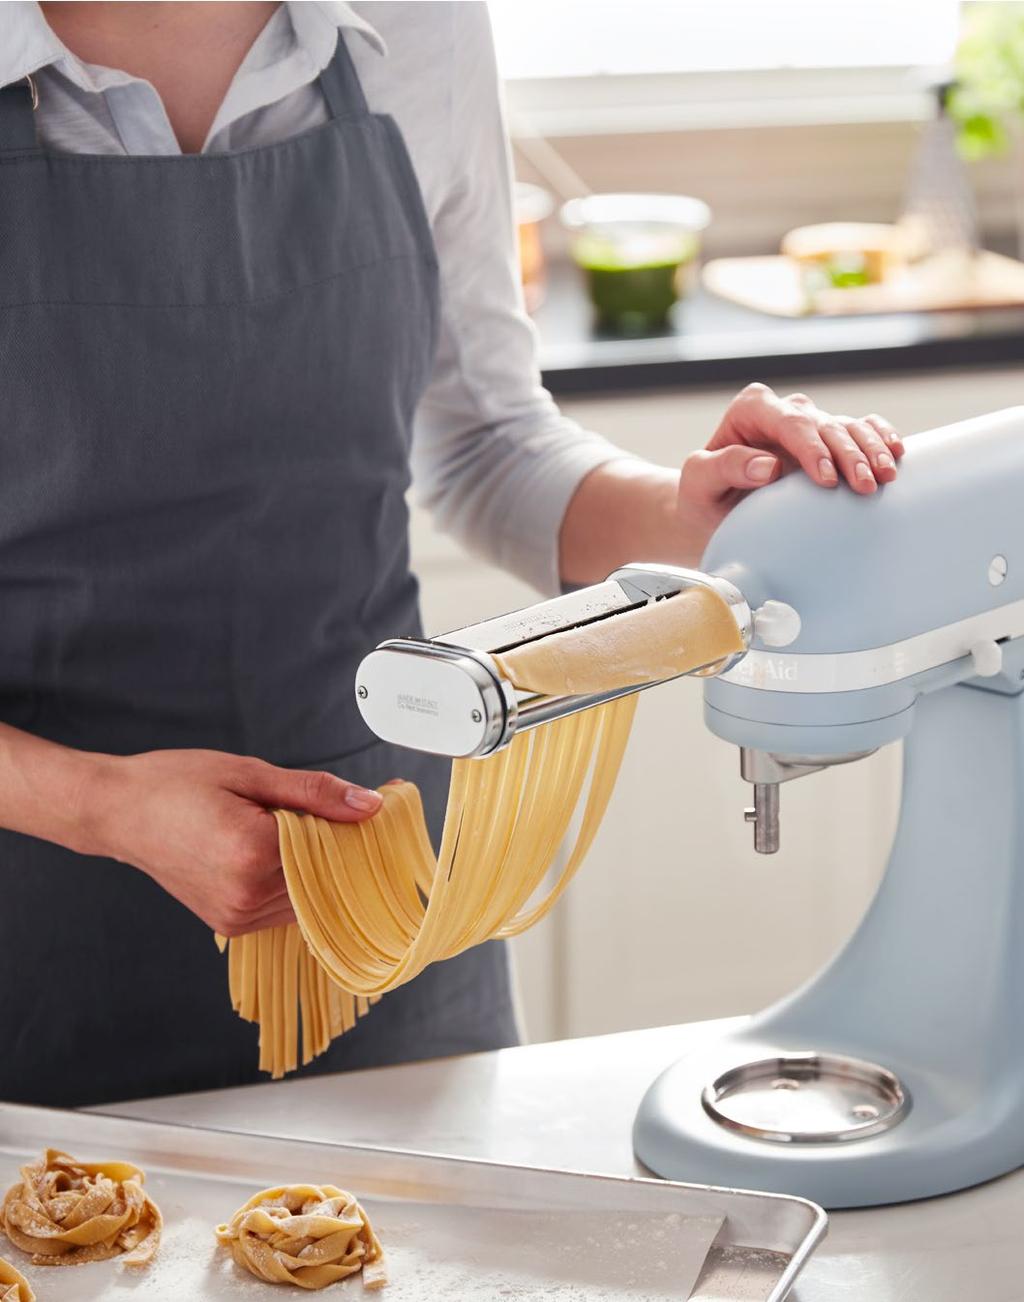 FETTUCCINE BITES WITH CHIVES, KALE AND PROSCIUTTO Preparation time : 60 minutes Makes for 4 servings Products: Limited Edition Heritage Artisan and Pasta Set Attachment DIRECTIONS Combine the flour